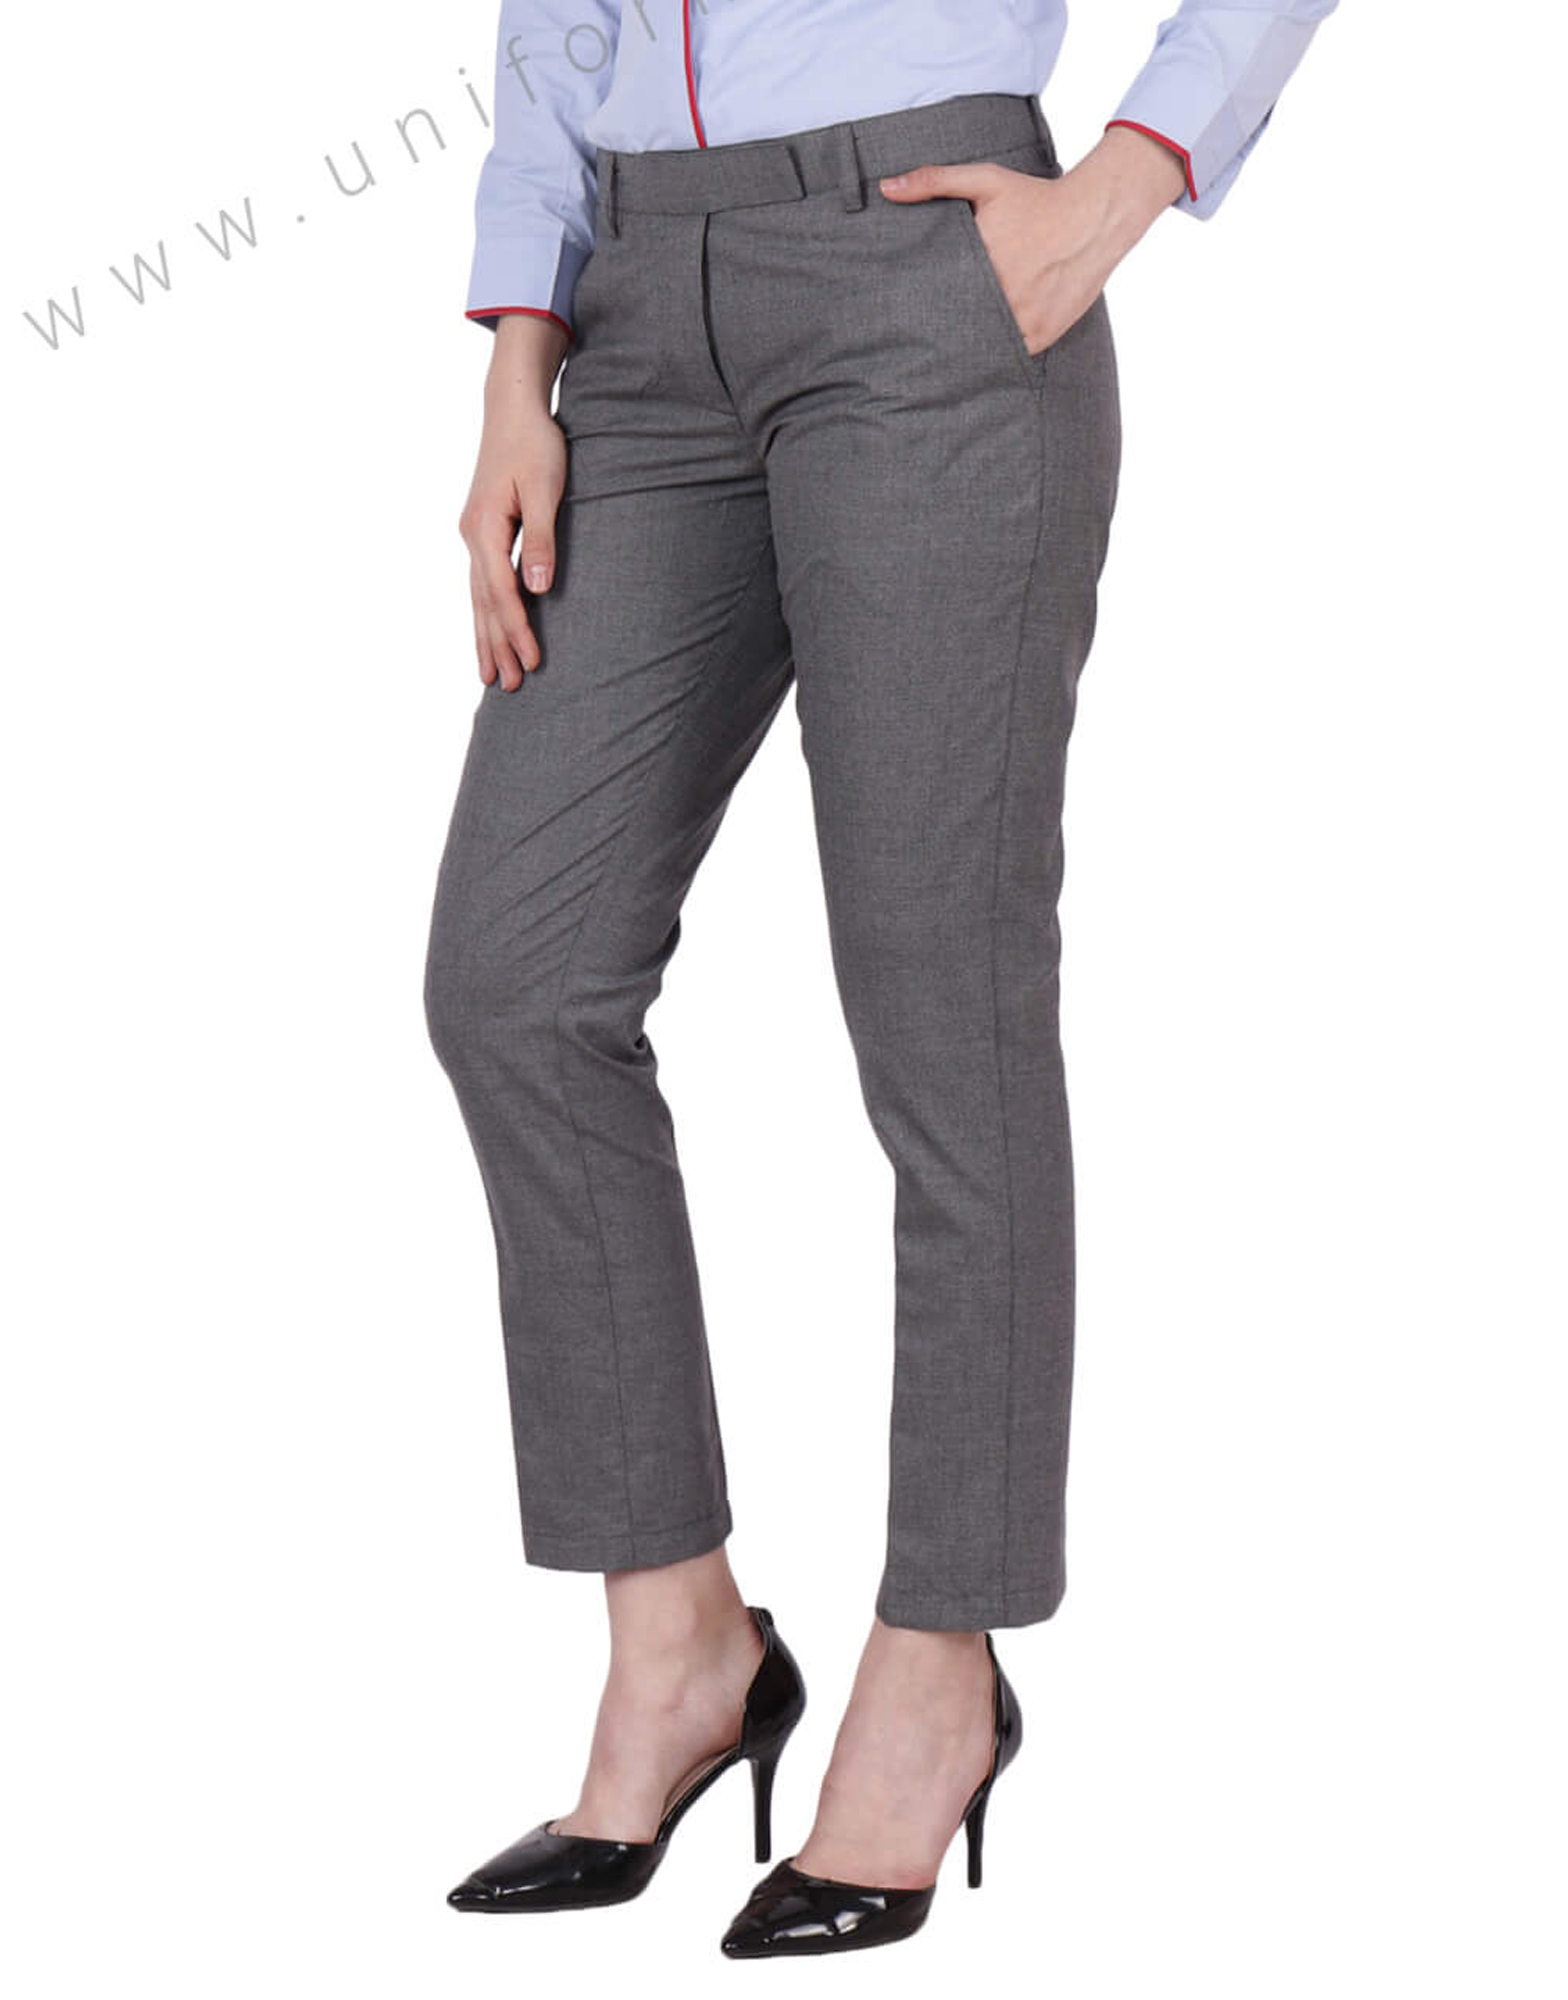 Ladies Dress Pant Suits Women Sleeve Formal New Business Attire New Outfits  Sets #dress #clothes #moda #fashion #suit | Moda ropa de trabajo, Ropa,  Ropa elegante